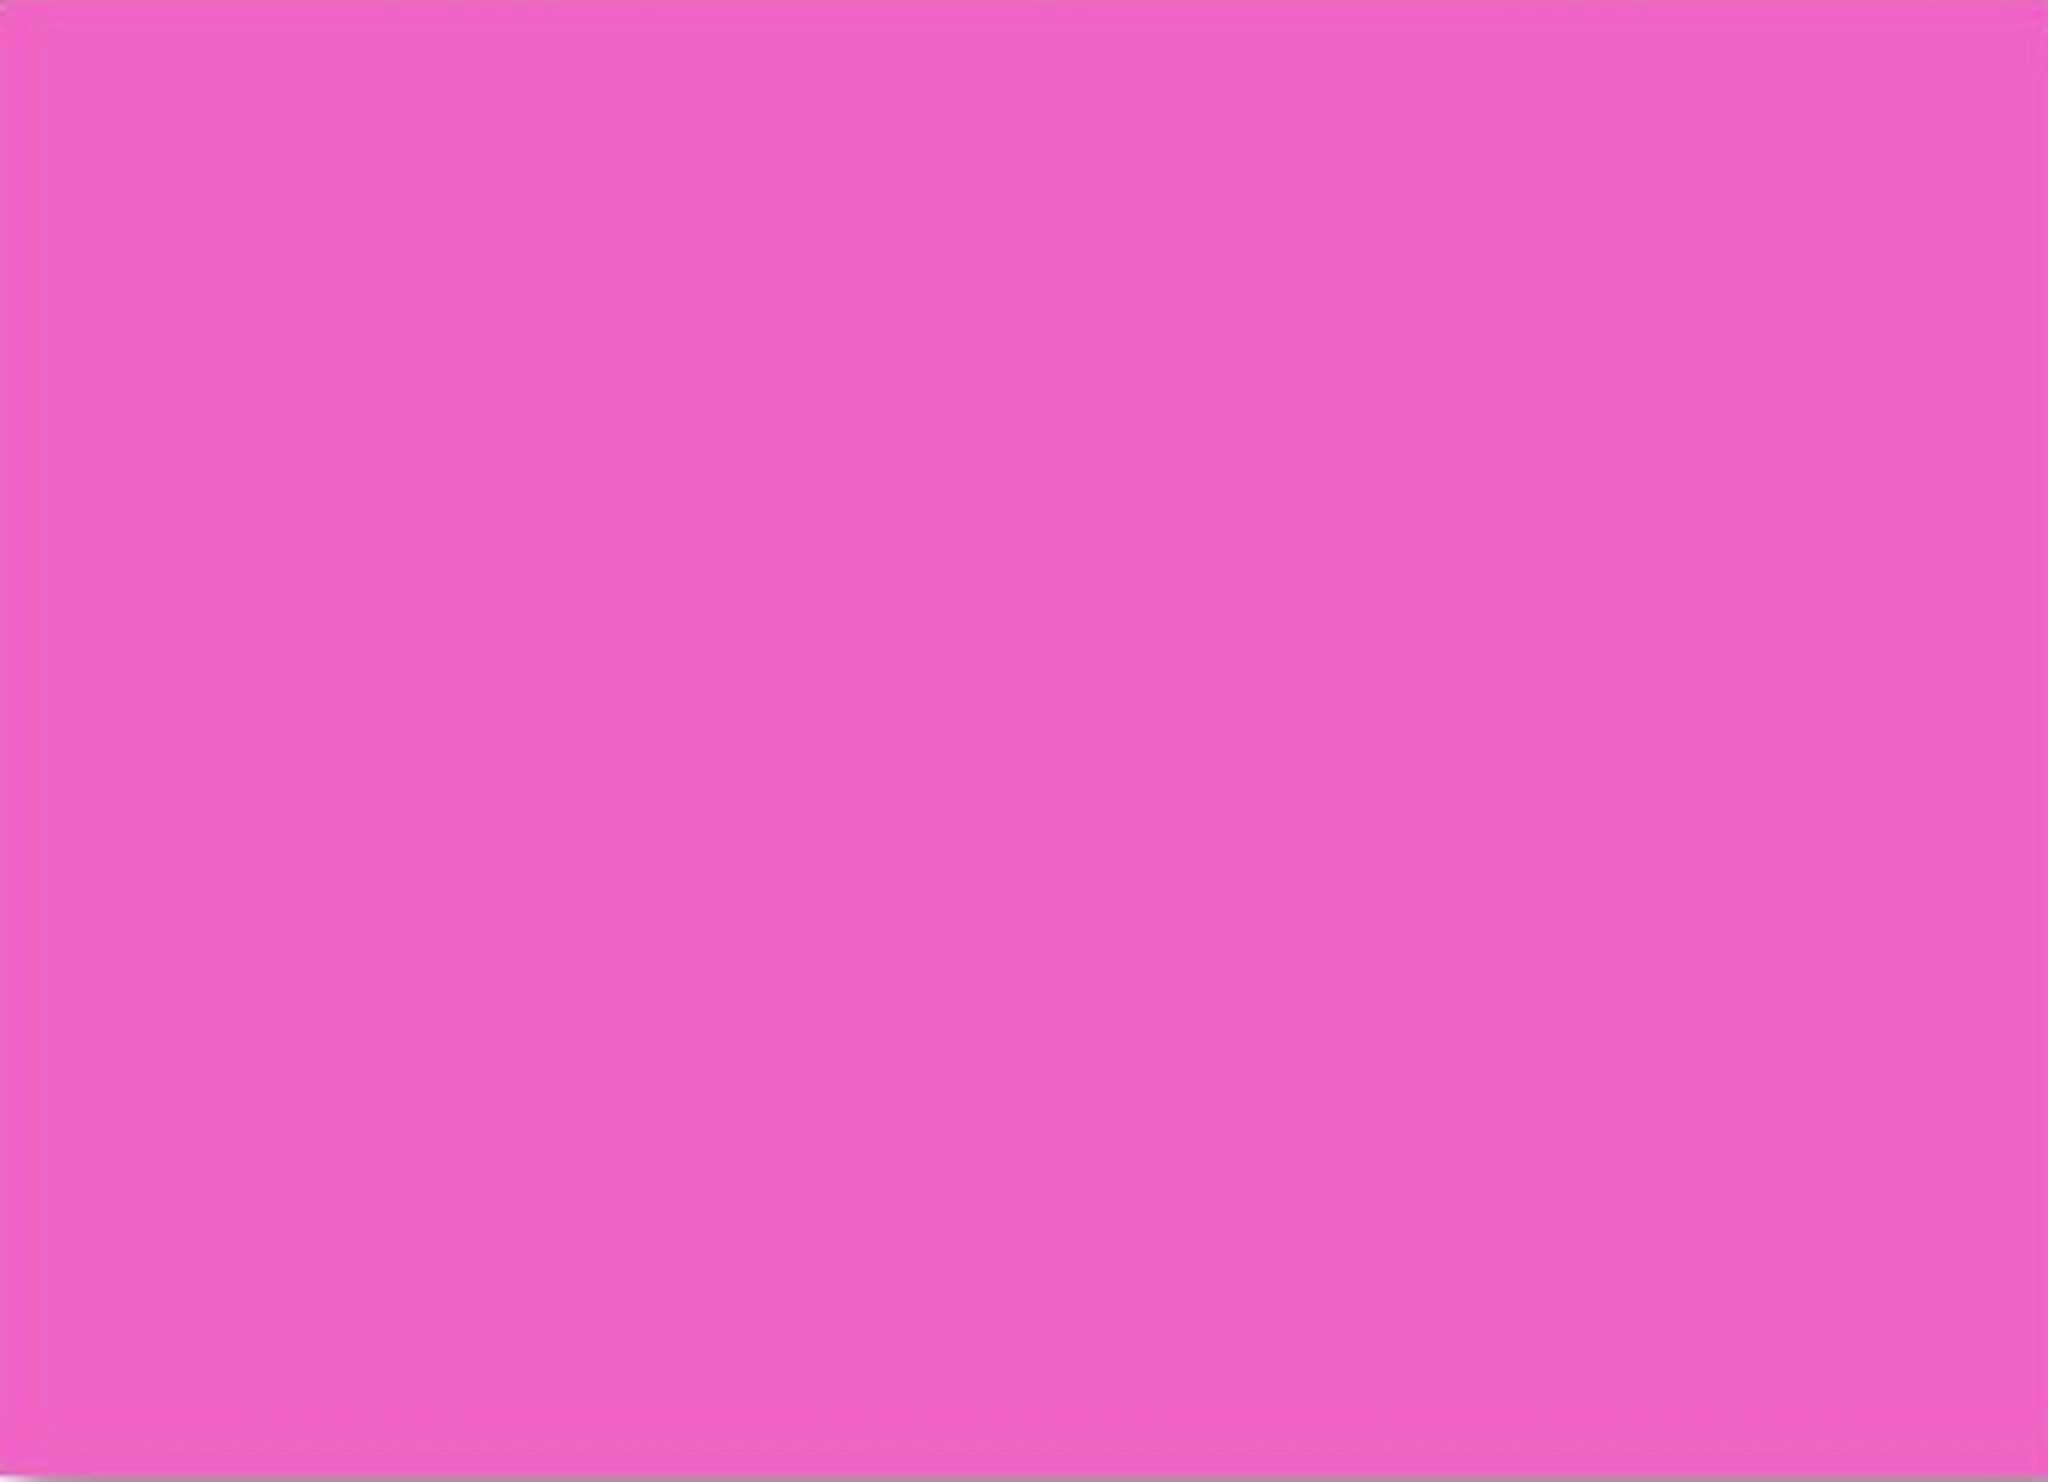 Plain Neon Pink Background For